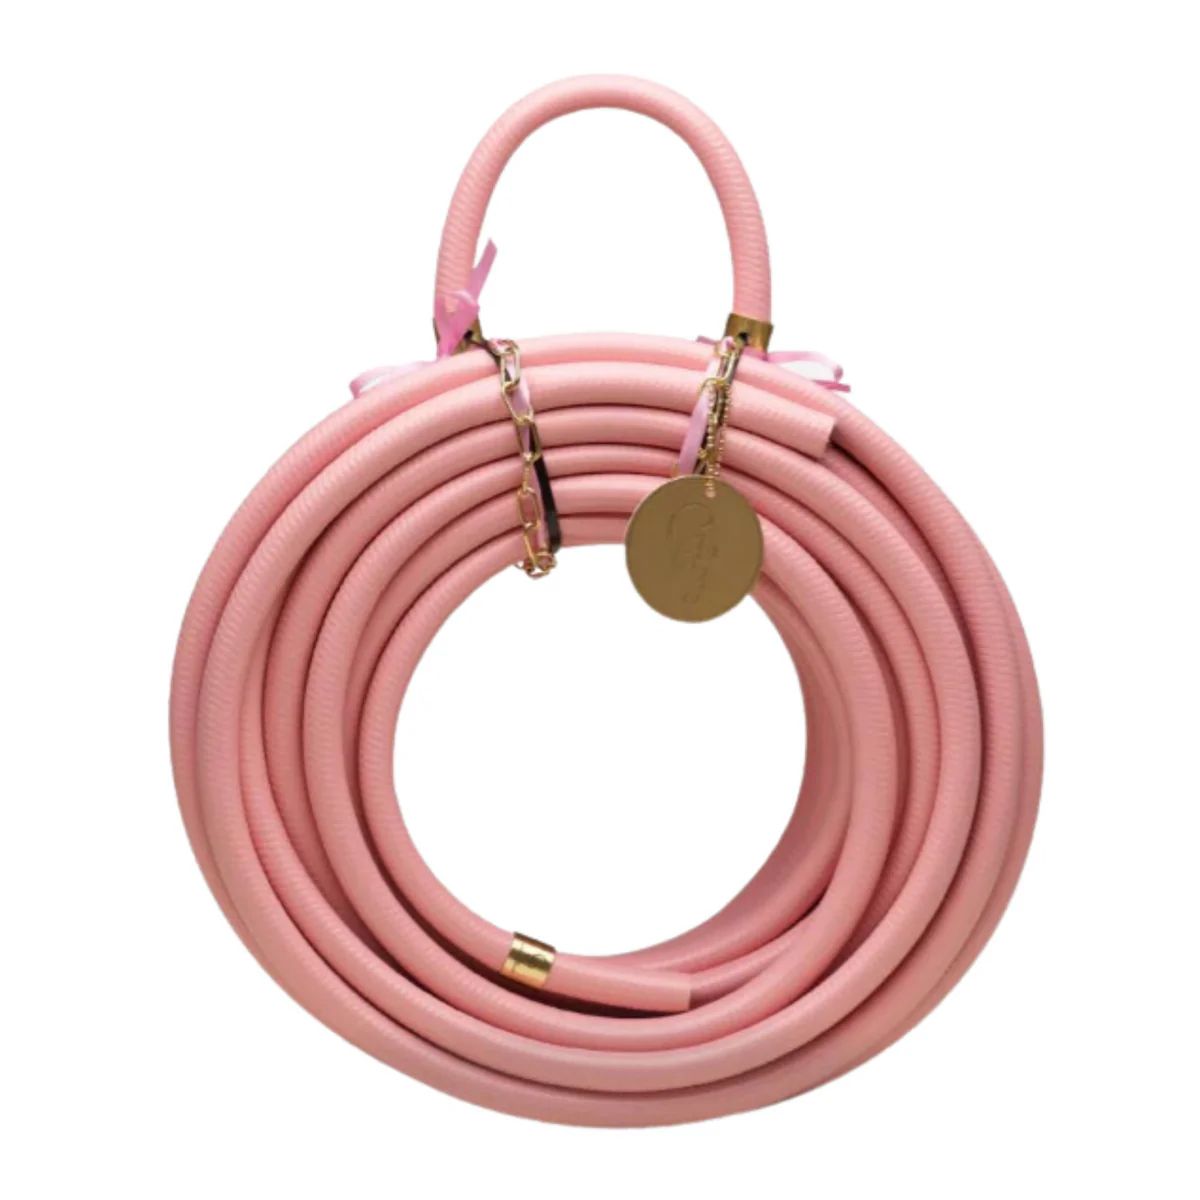 Blooming Blossom Pink Garden Hose | The Well Appointed House, LLC